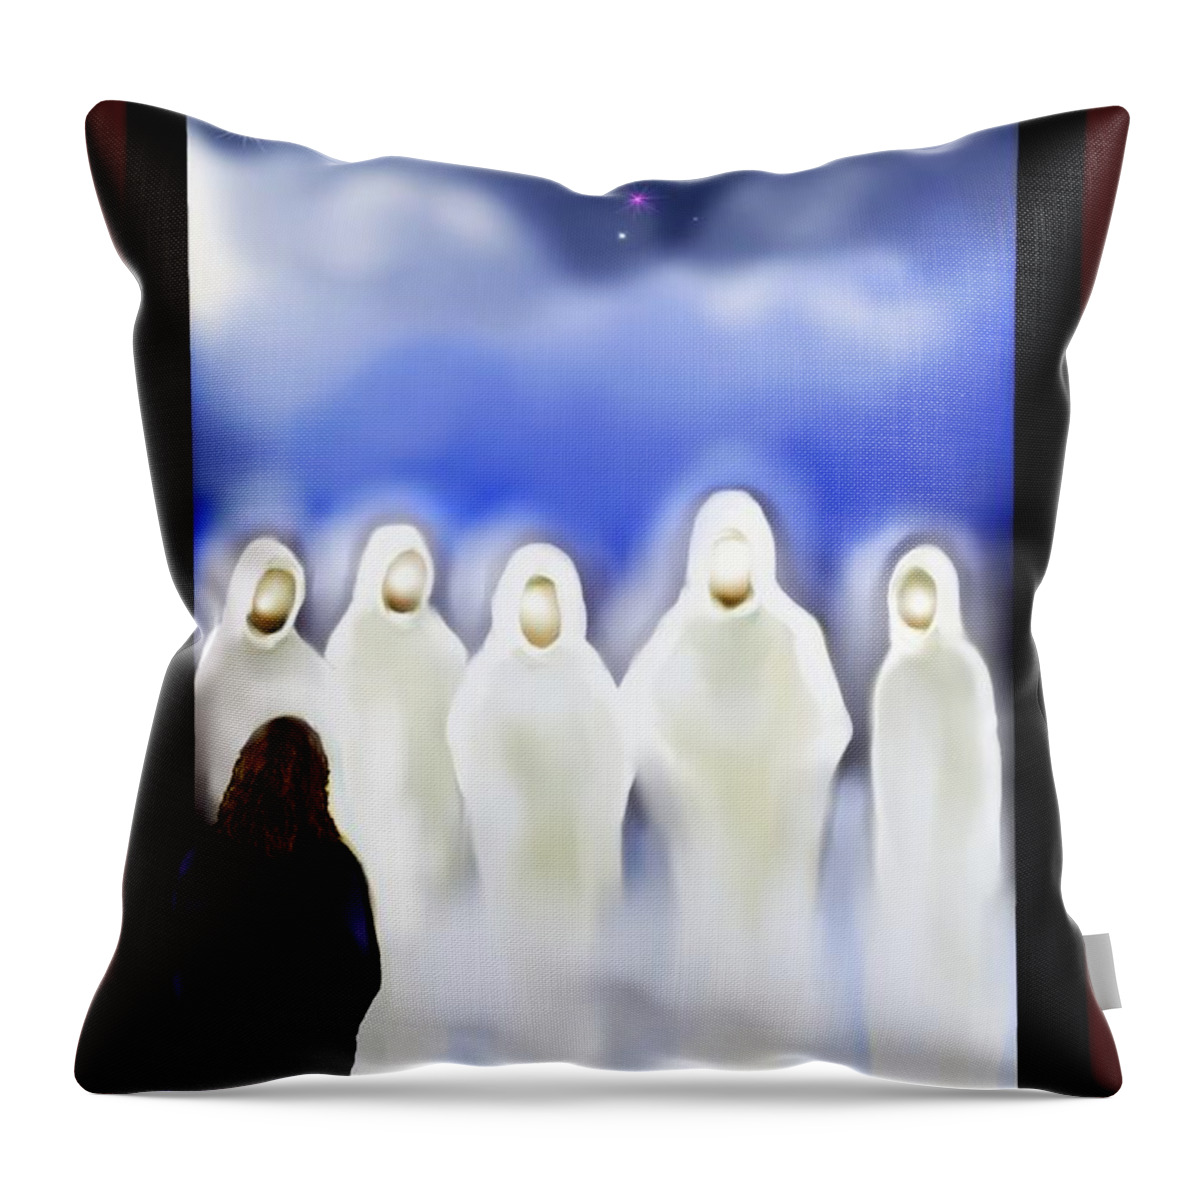 Entrance Throw Pillow featuring the digital art Entrance to the Unknown by Carmen Cordova